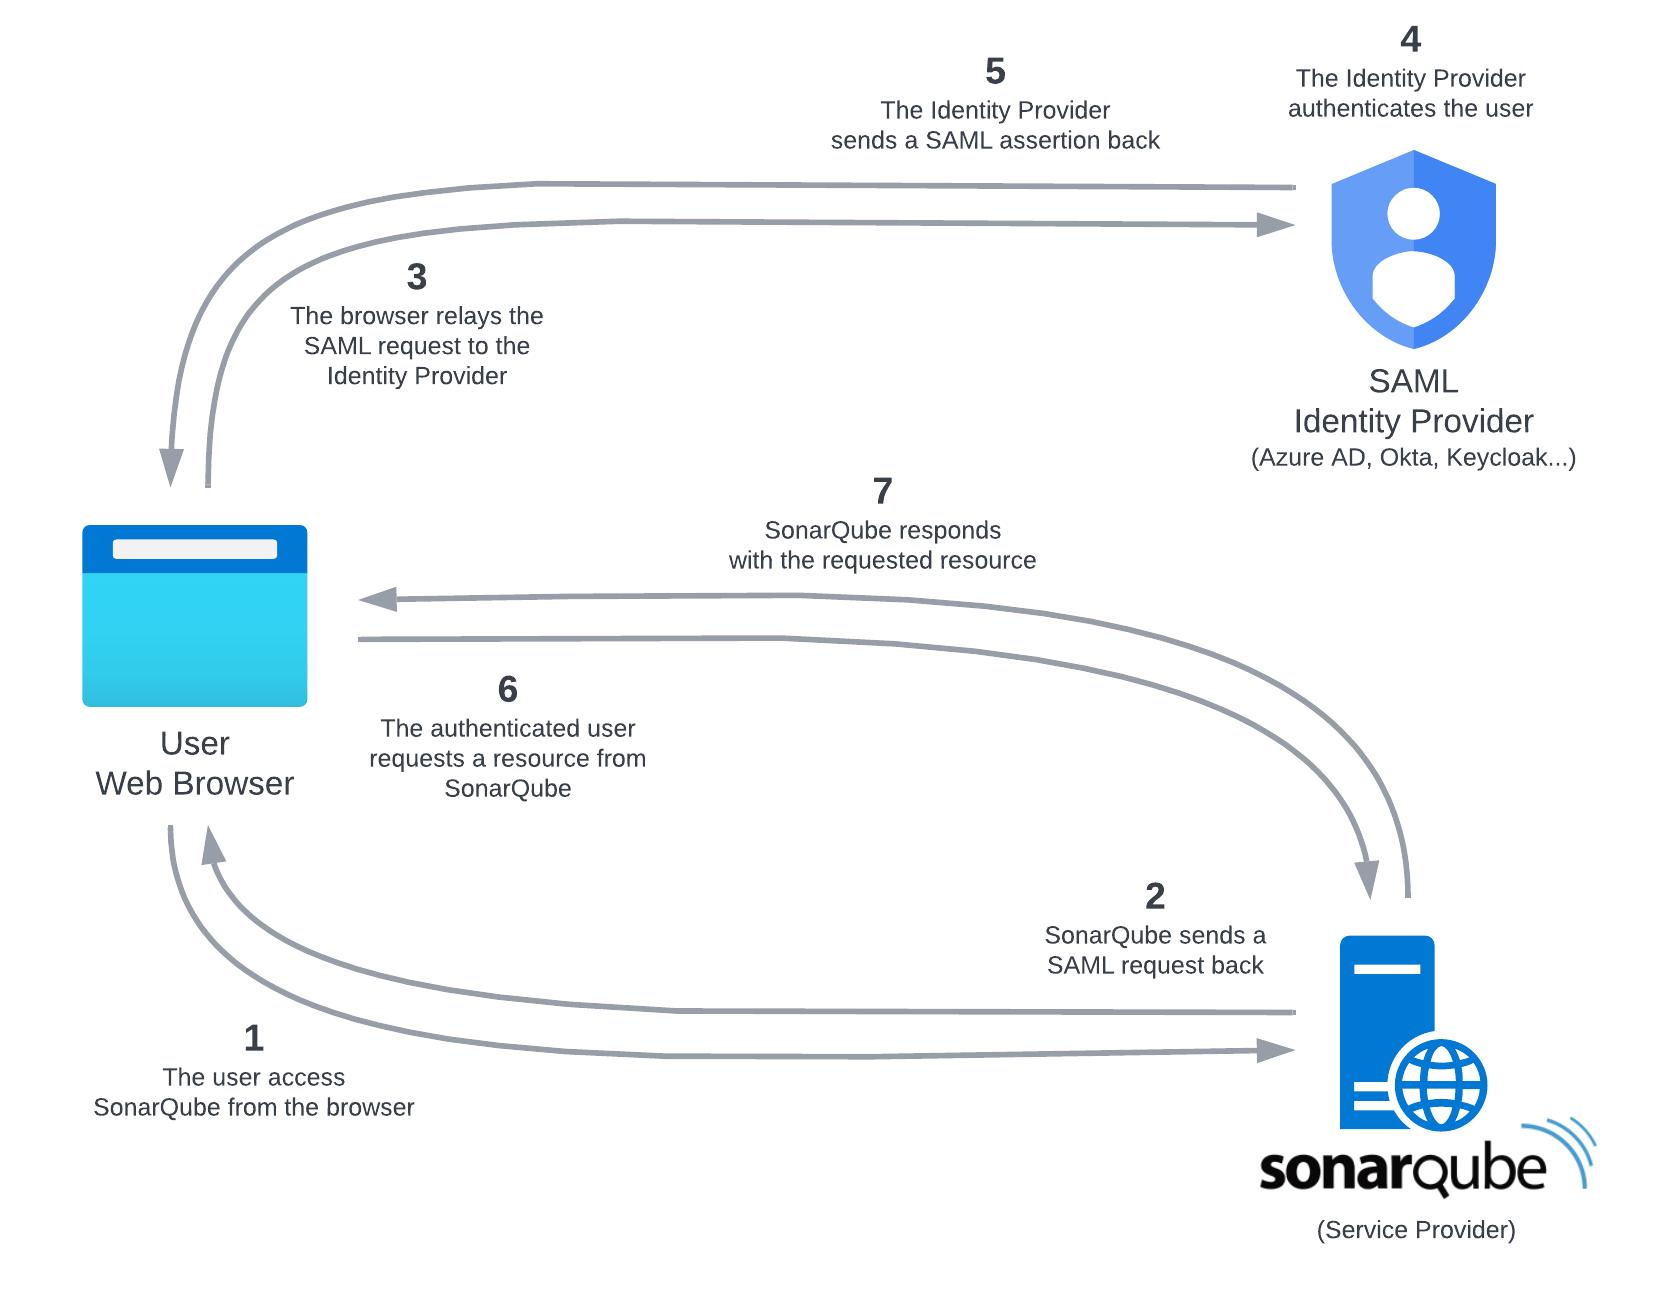 illustrate the looping conditions initiated by a user's SAML authentication process